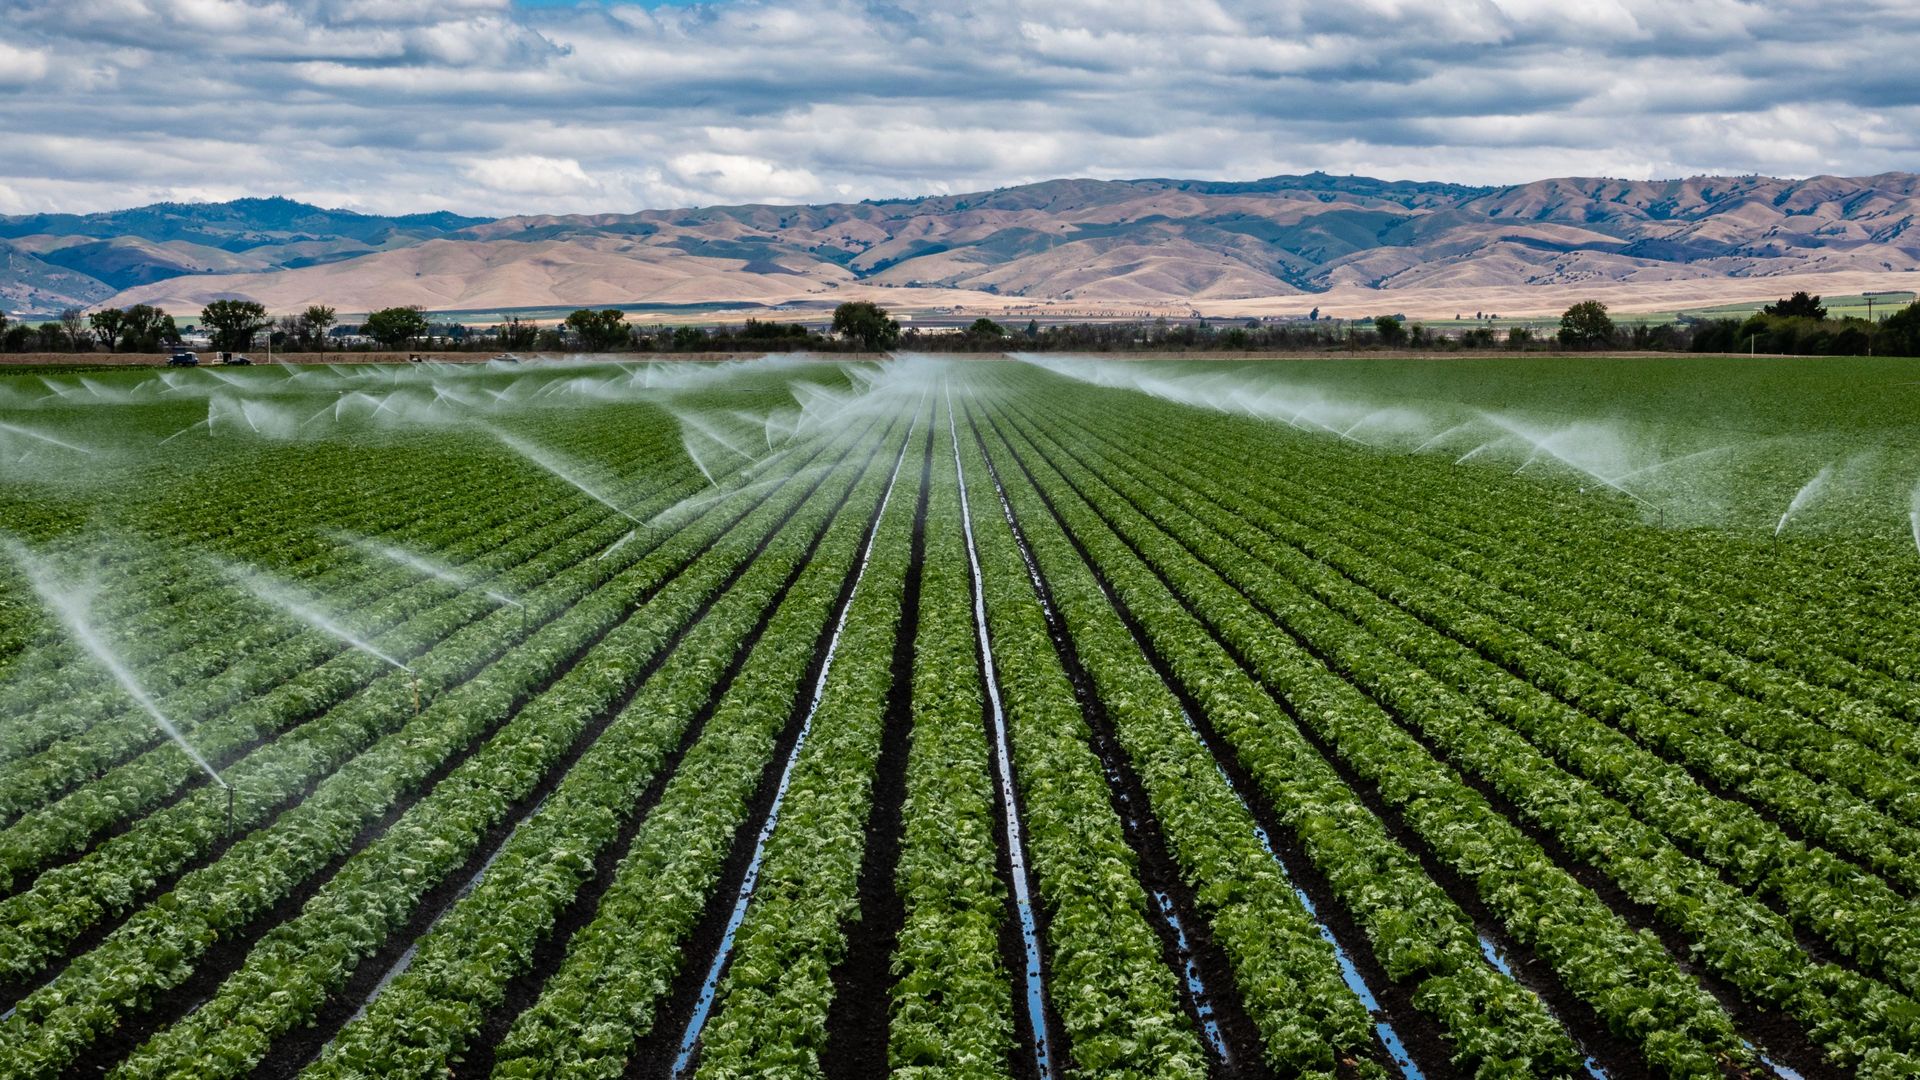 Image of a large-scale vegetable farm during irrigation